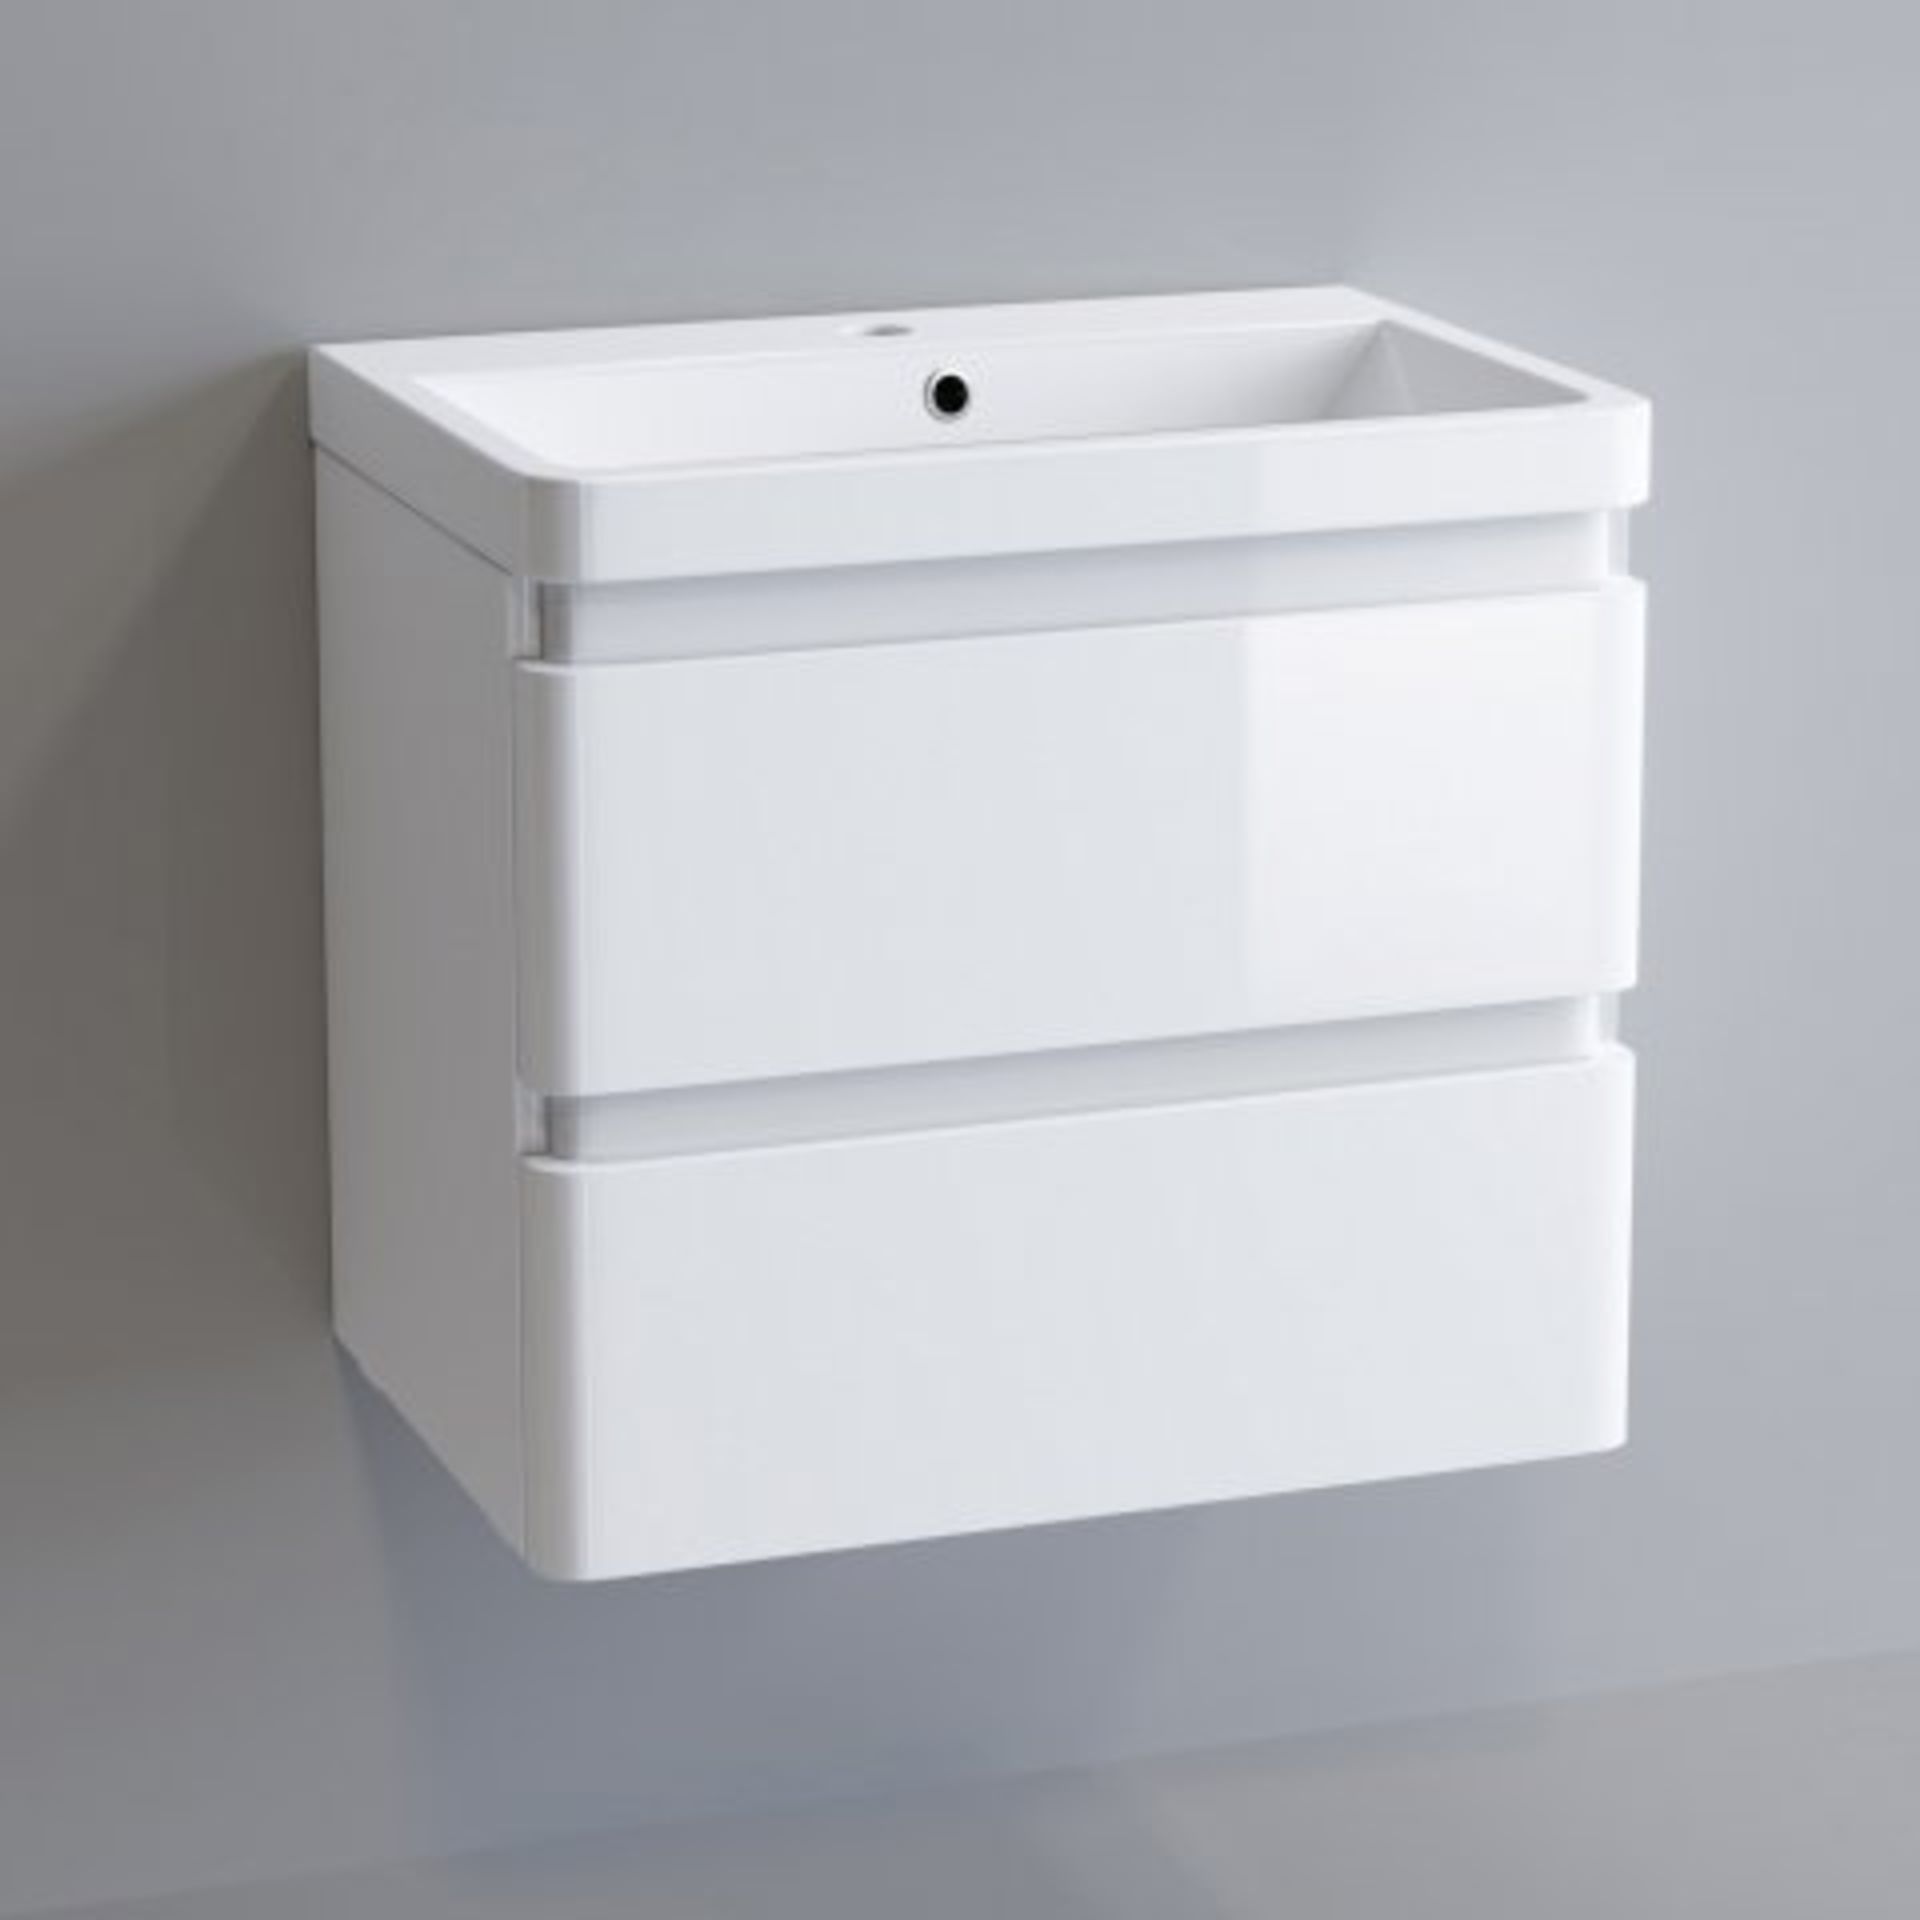 (L75) 600mm Denver II Gloss White Built In Basin Drawer Unit - Wall Hung. RRP £599.99. COMES - Image 4 of 4